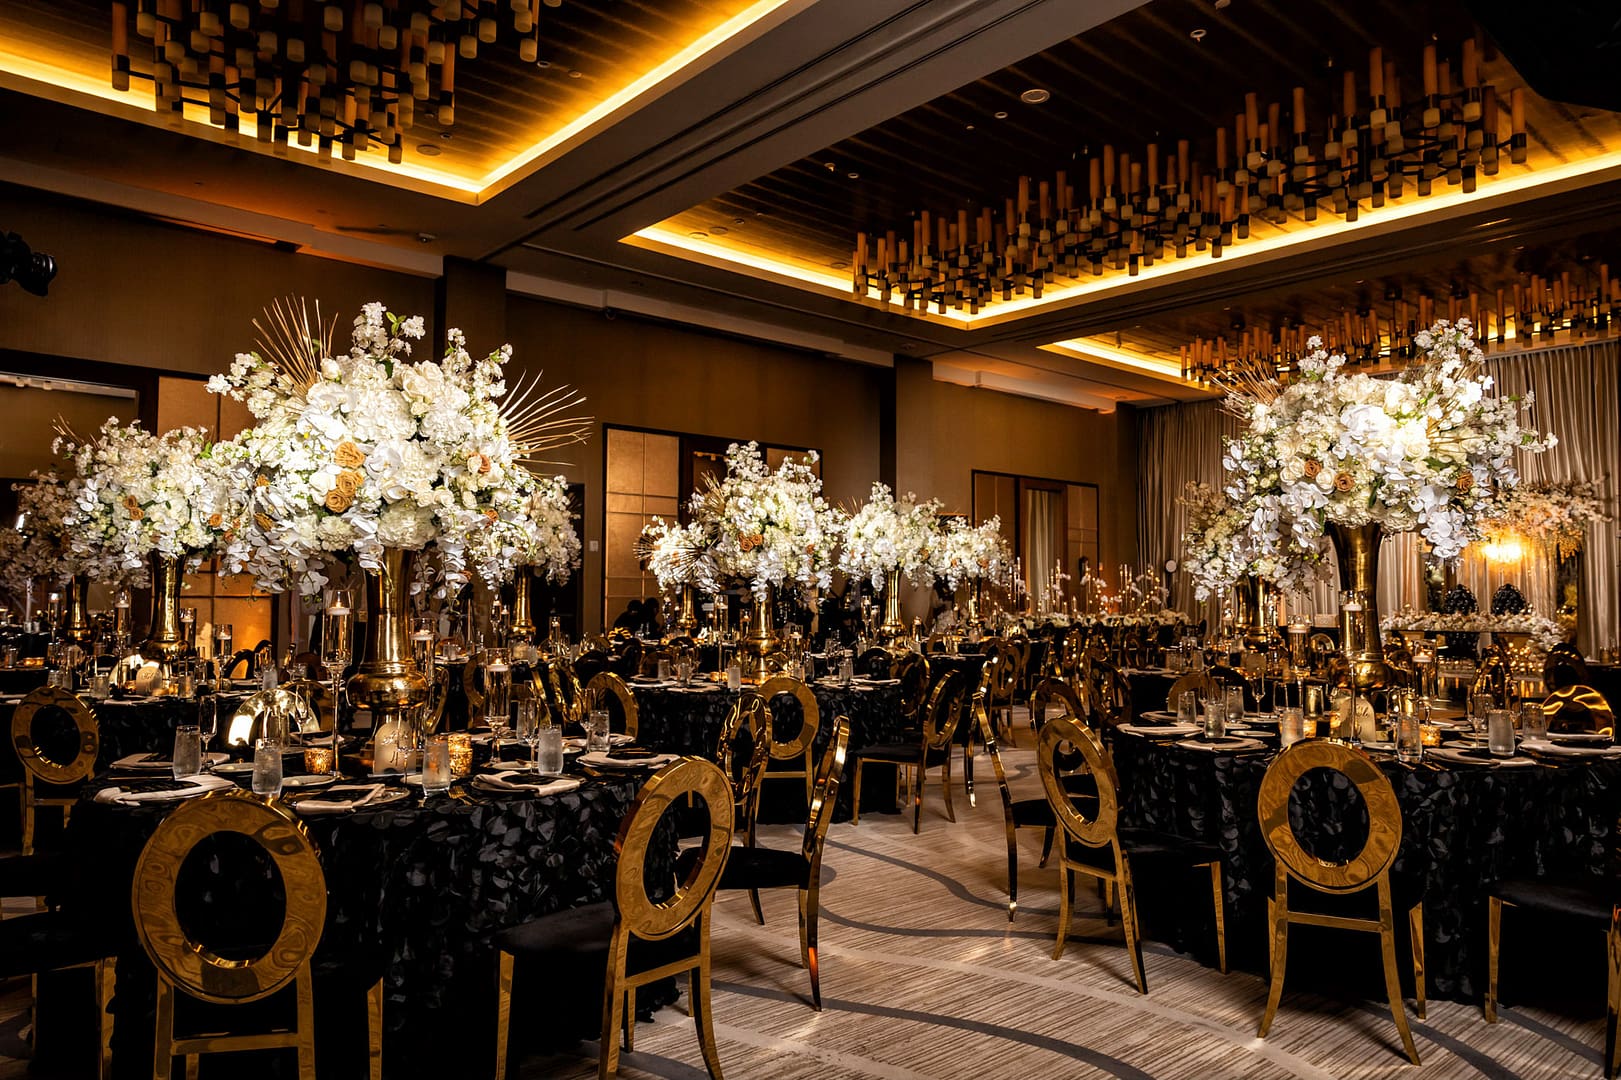 Extravagant Black and Gold Wedding Ceremony with Gold Chairs, Black Linens, and White Floral Centerpieces 